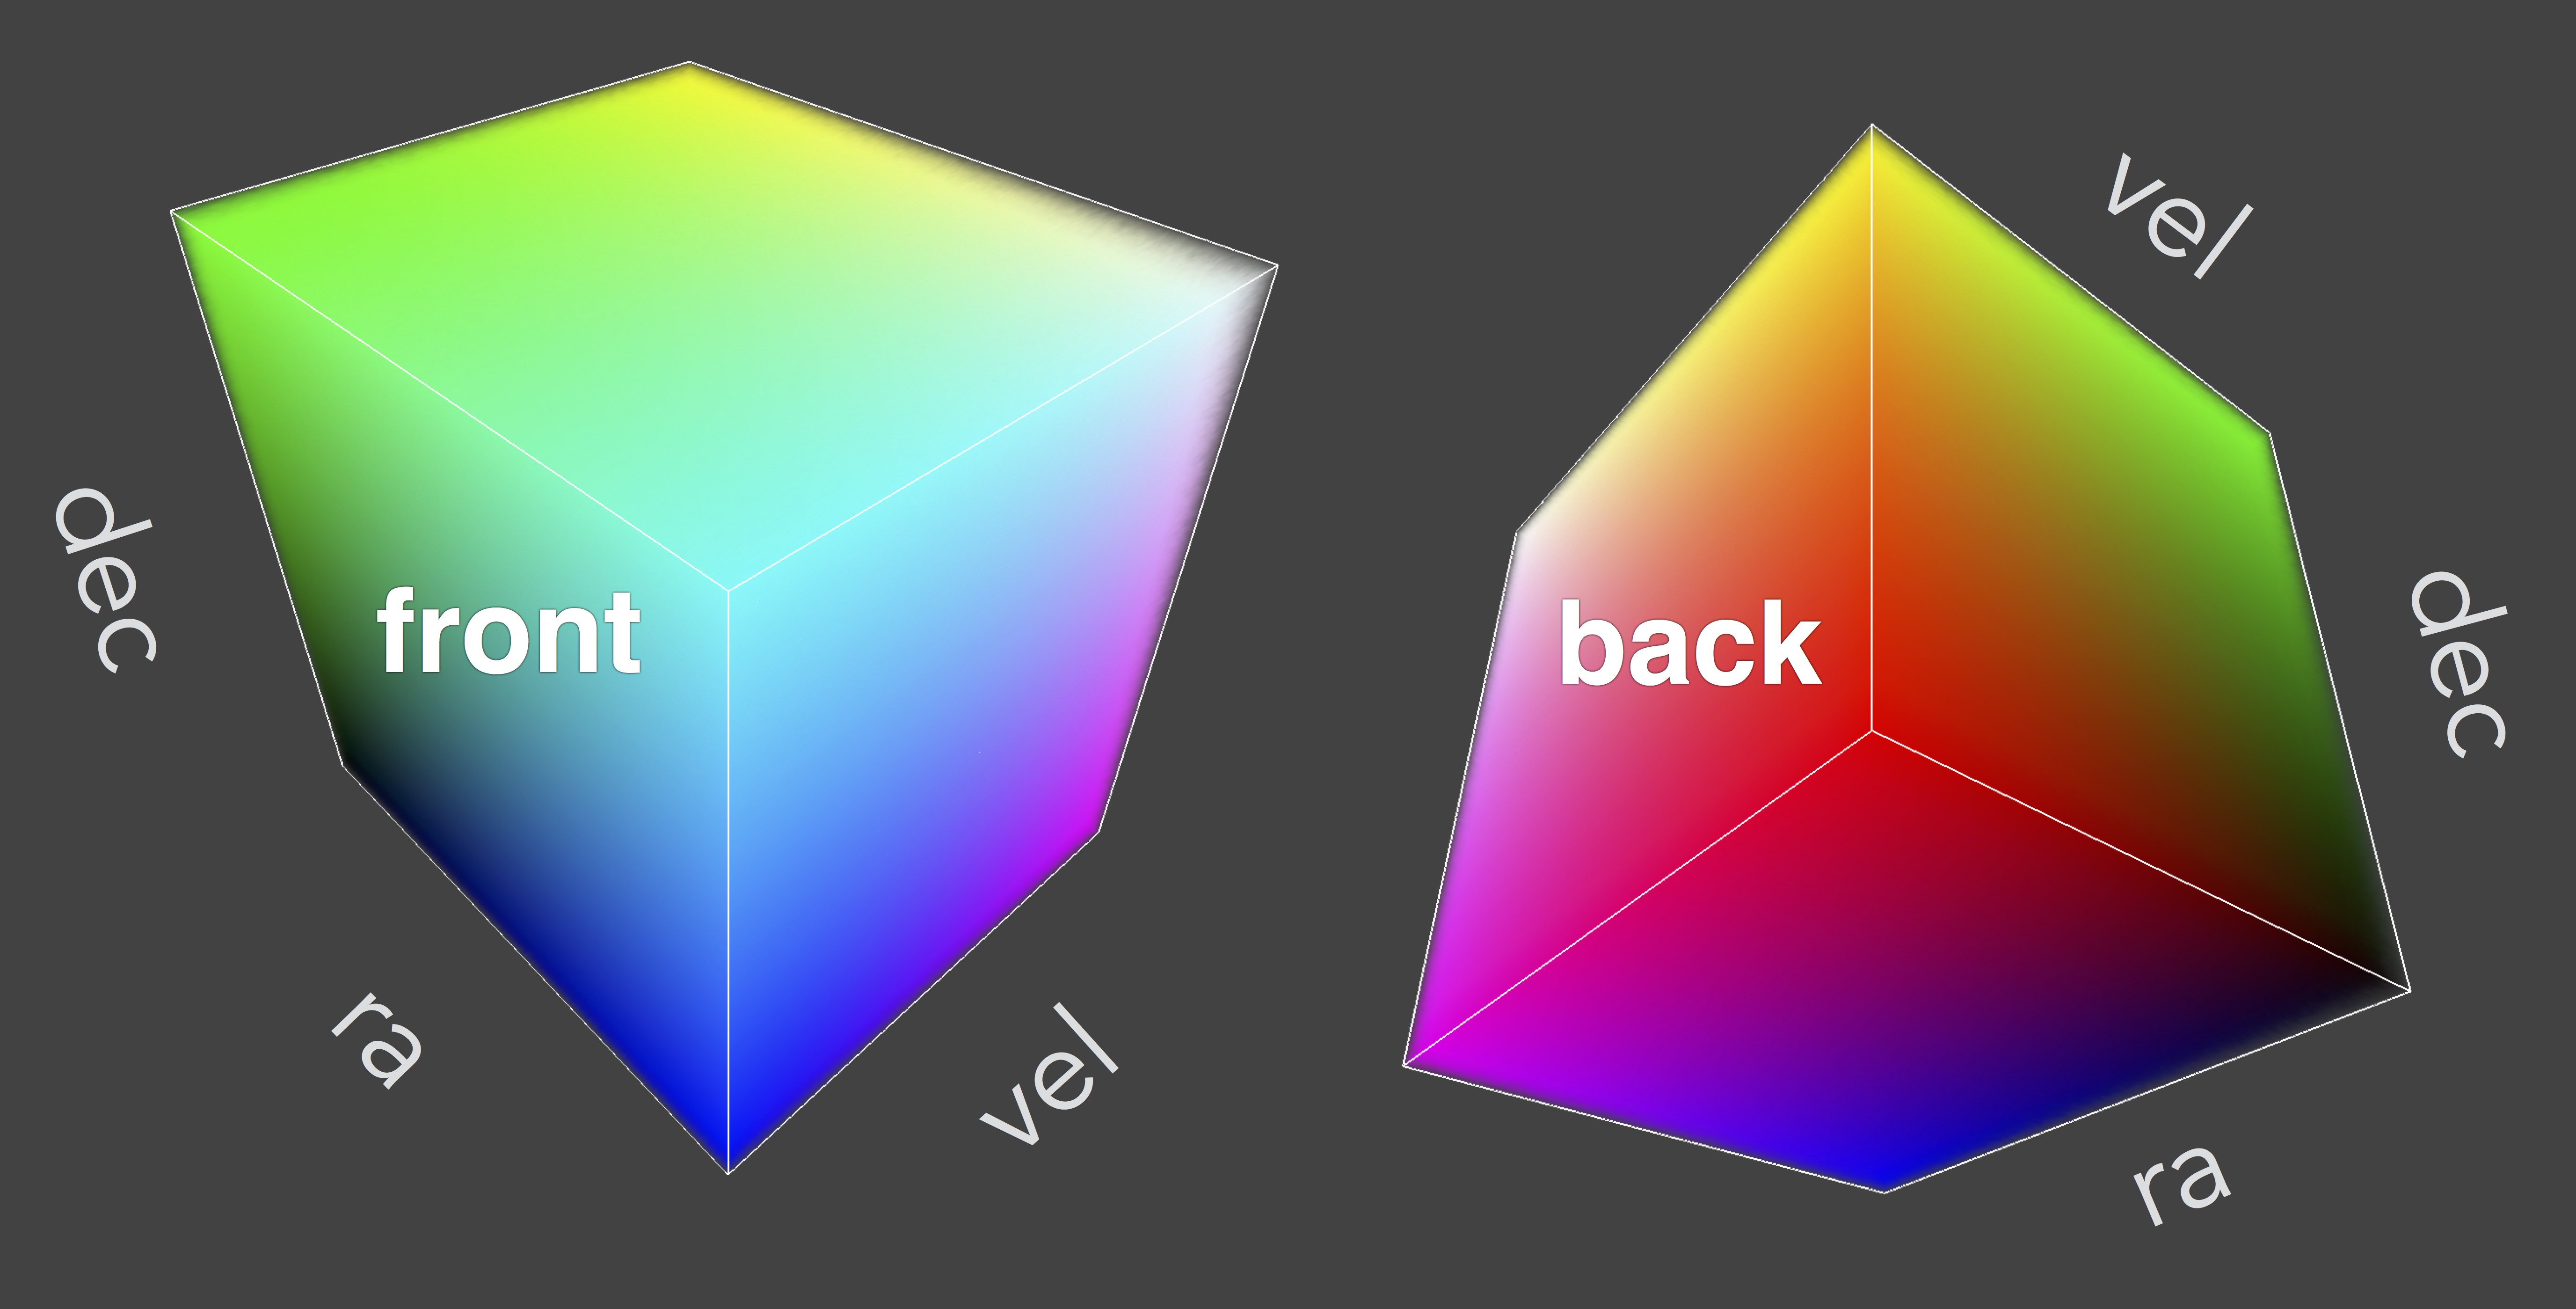 _images/rgb_cube.png